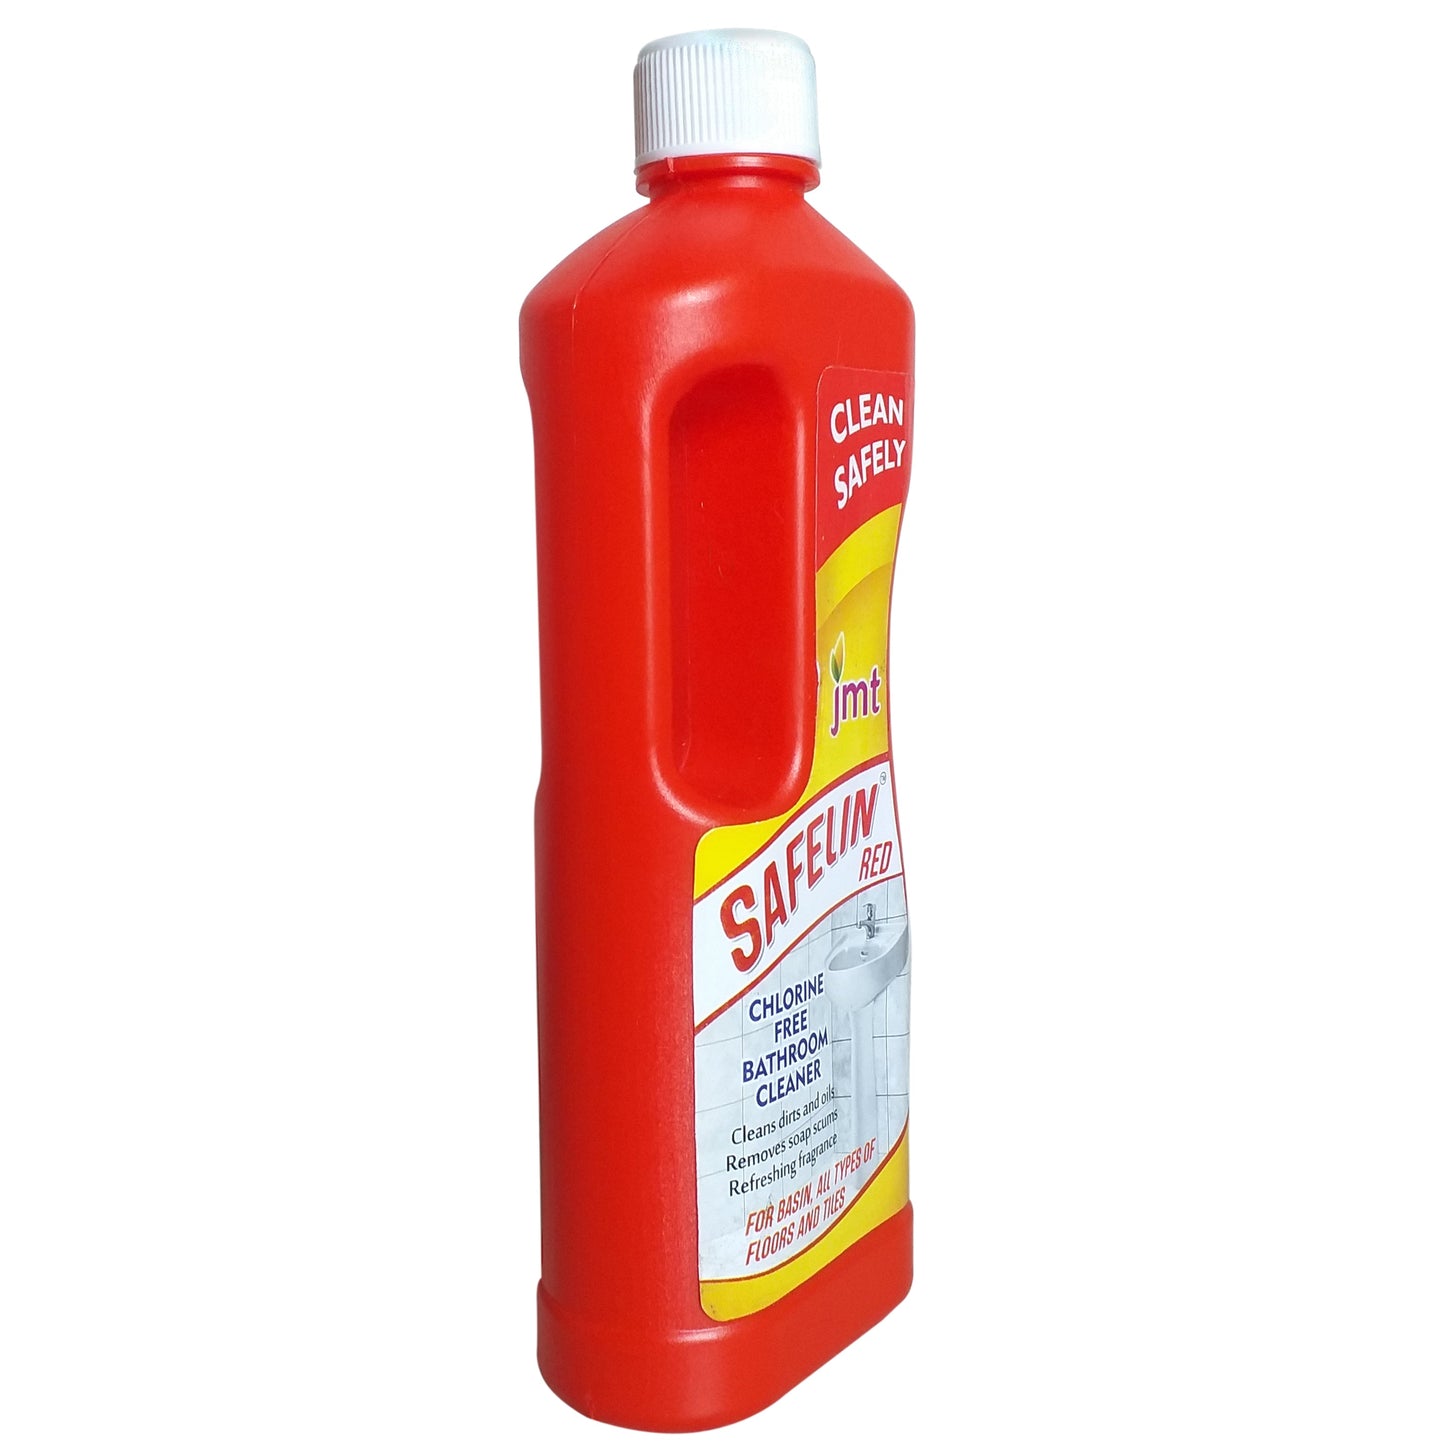 3000ml  Safelin Red Chlorine Free Regular Use Bathroom Cleaner for All Types of Bathroom Floors, Tiles and Basins (Pack of 6 x 500ml)